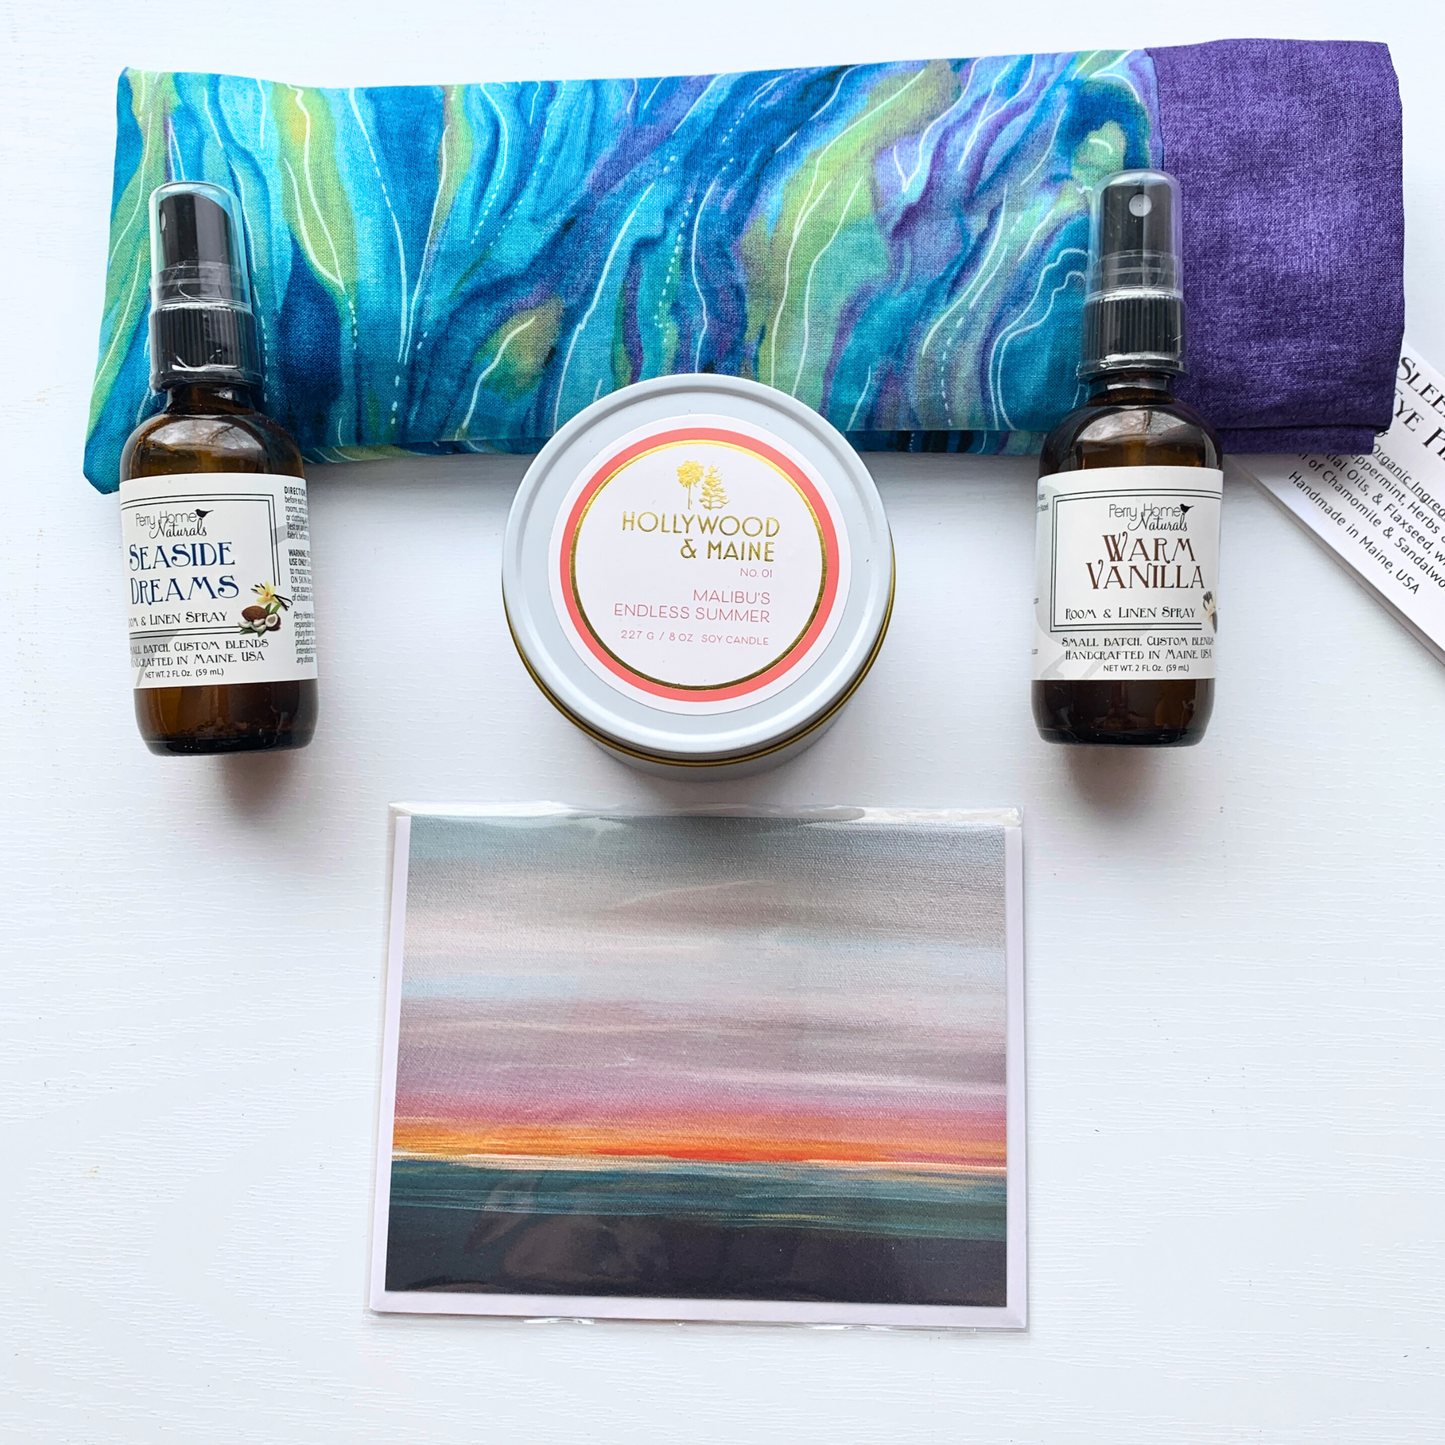 Warm and Summery, Beach Inspired Gift Set - Handmade Products by Maine Artisans